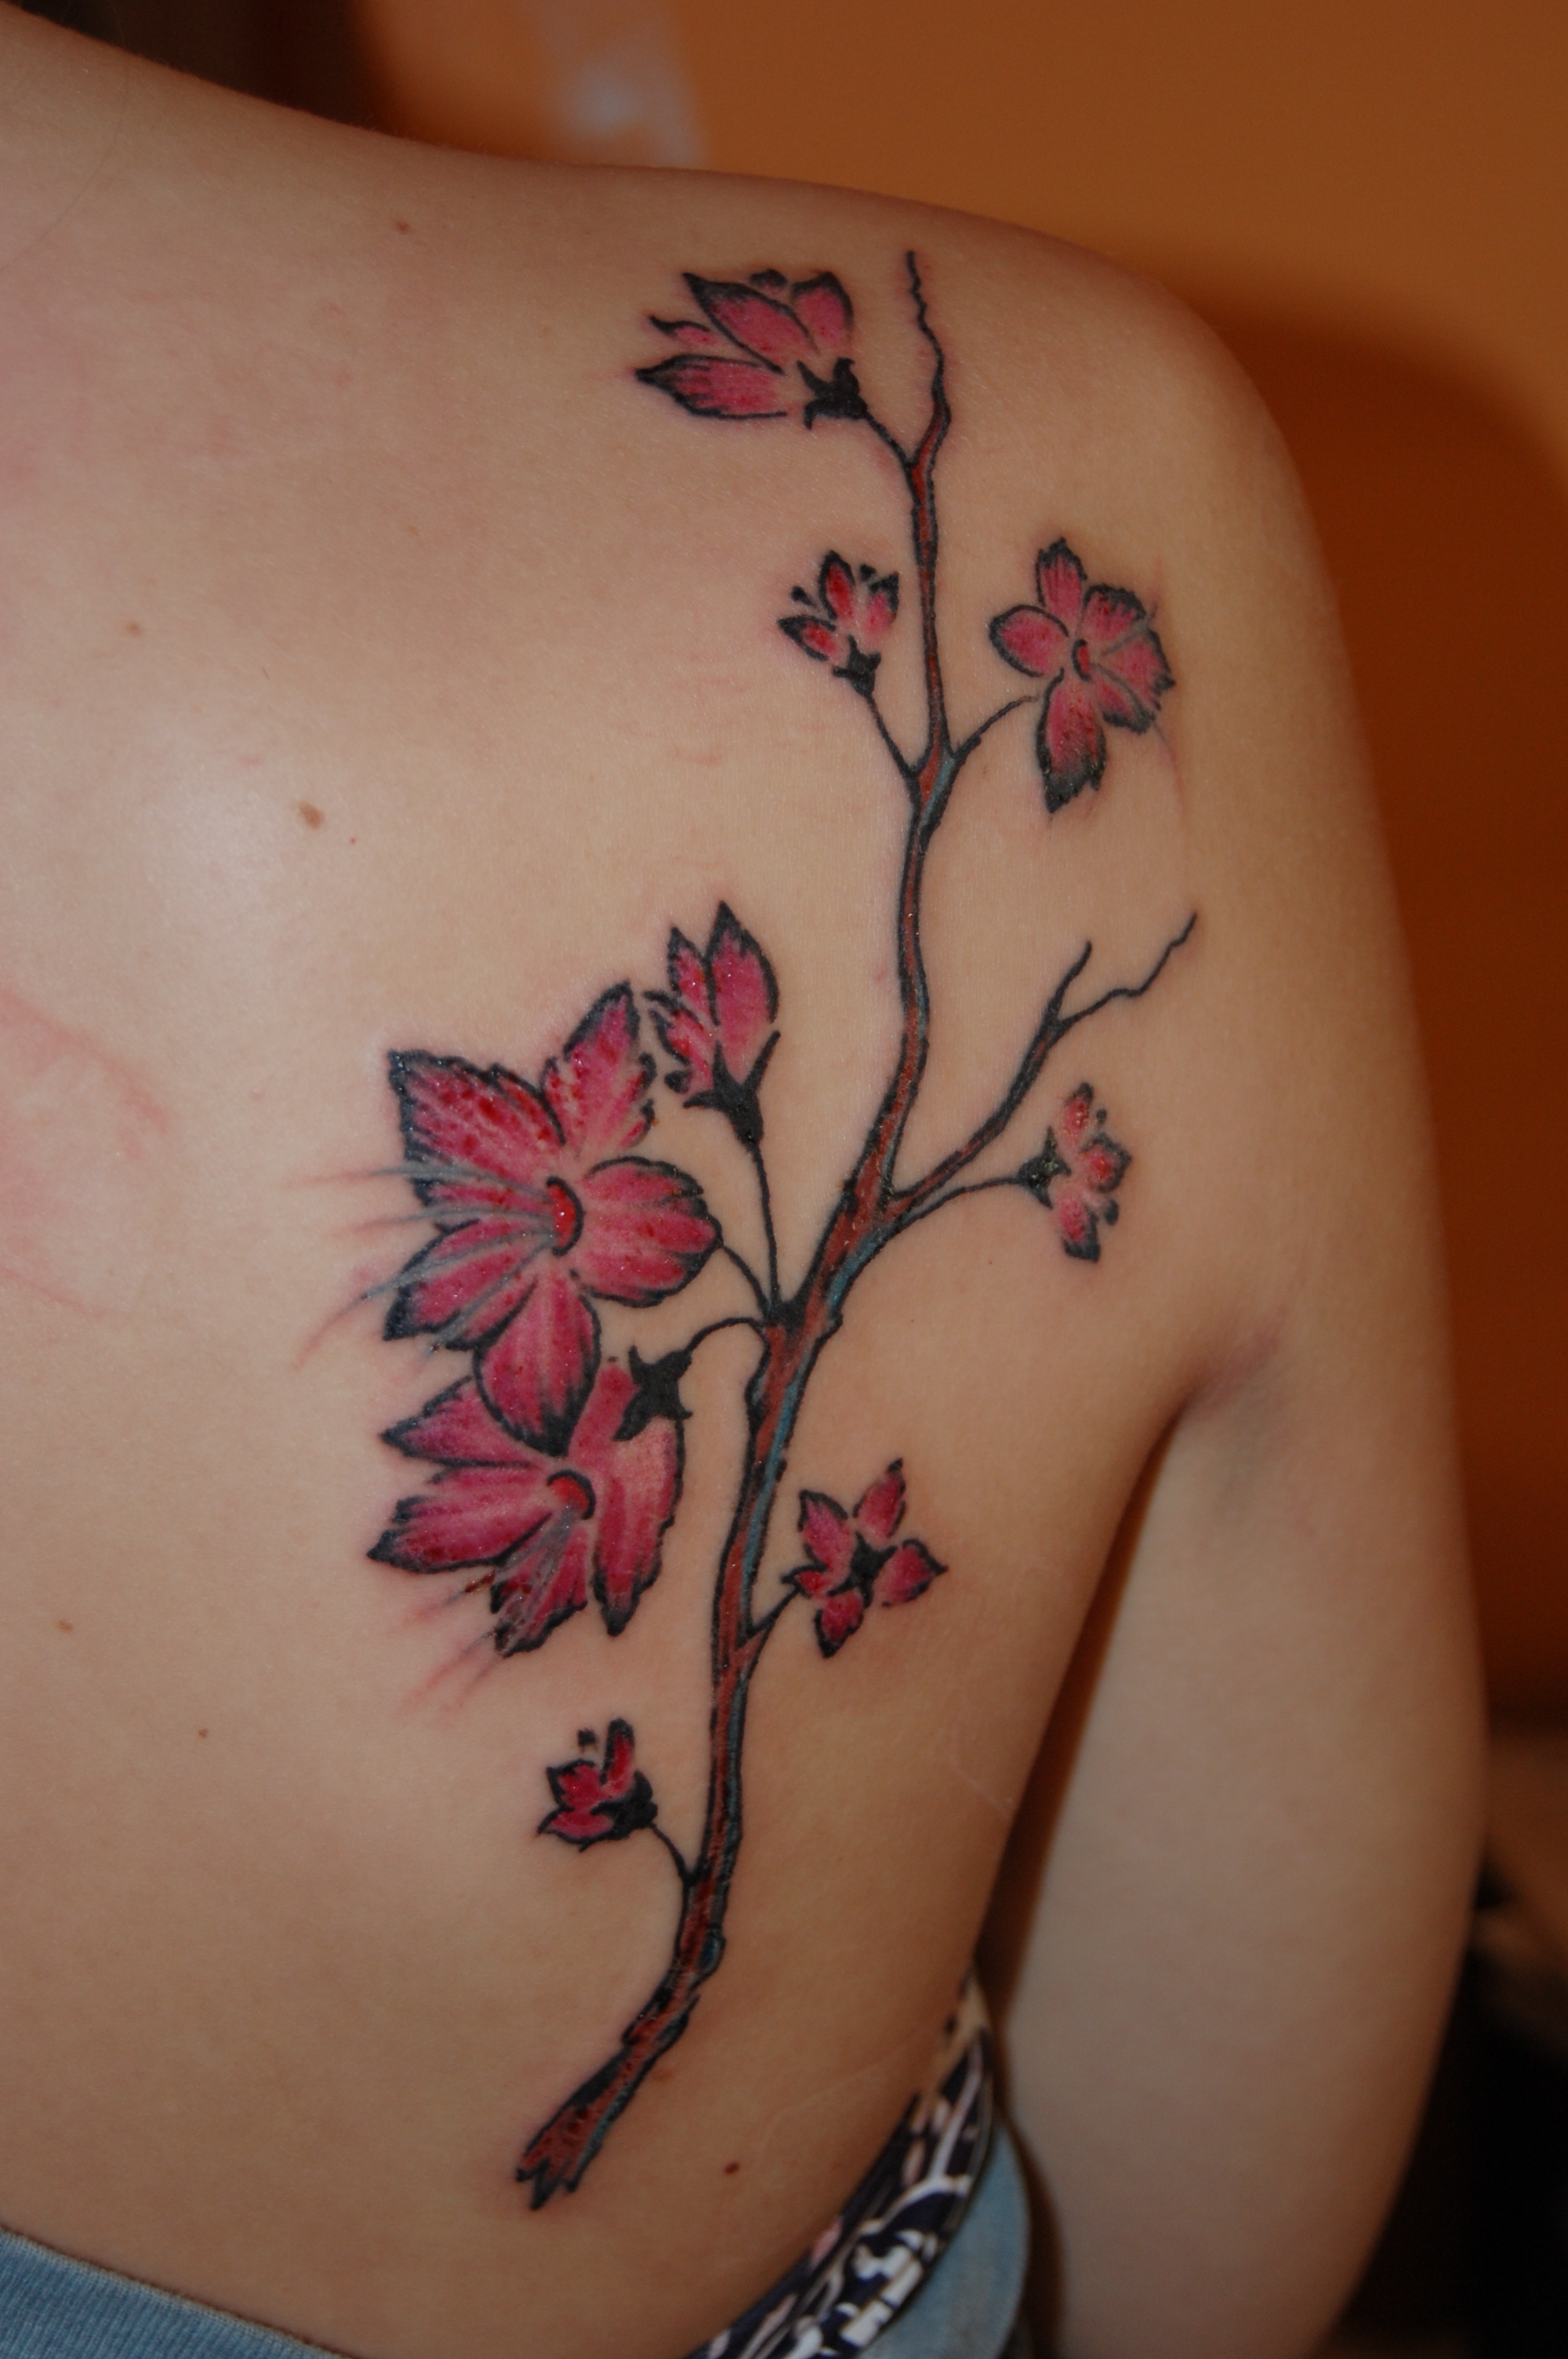 Cherry Blossom Tattoos Designs, Ideas and Meaning